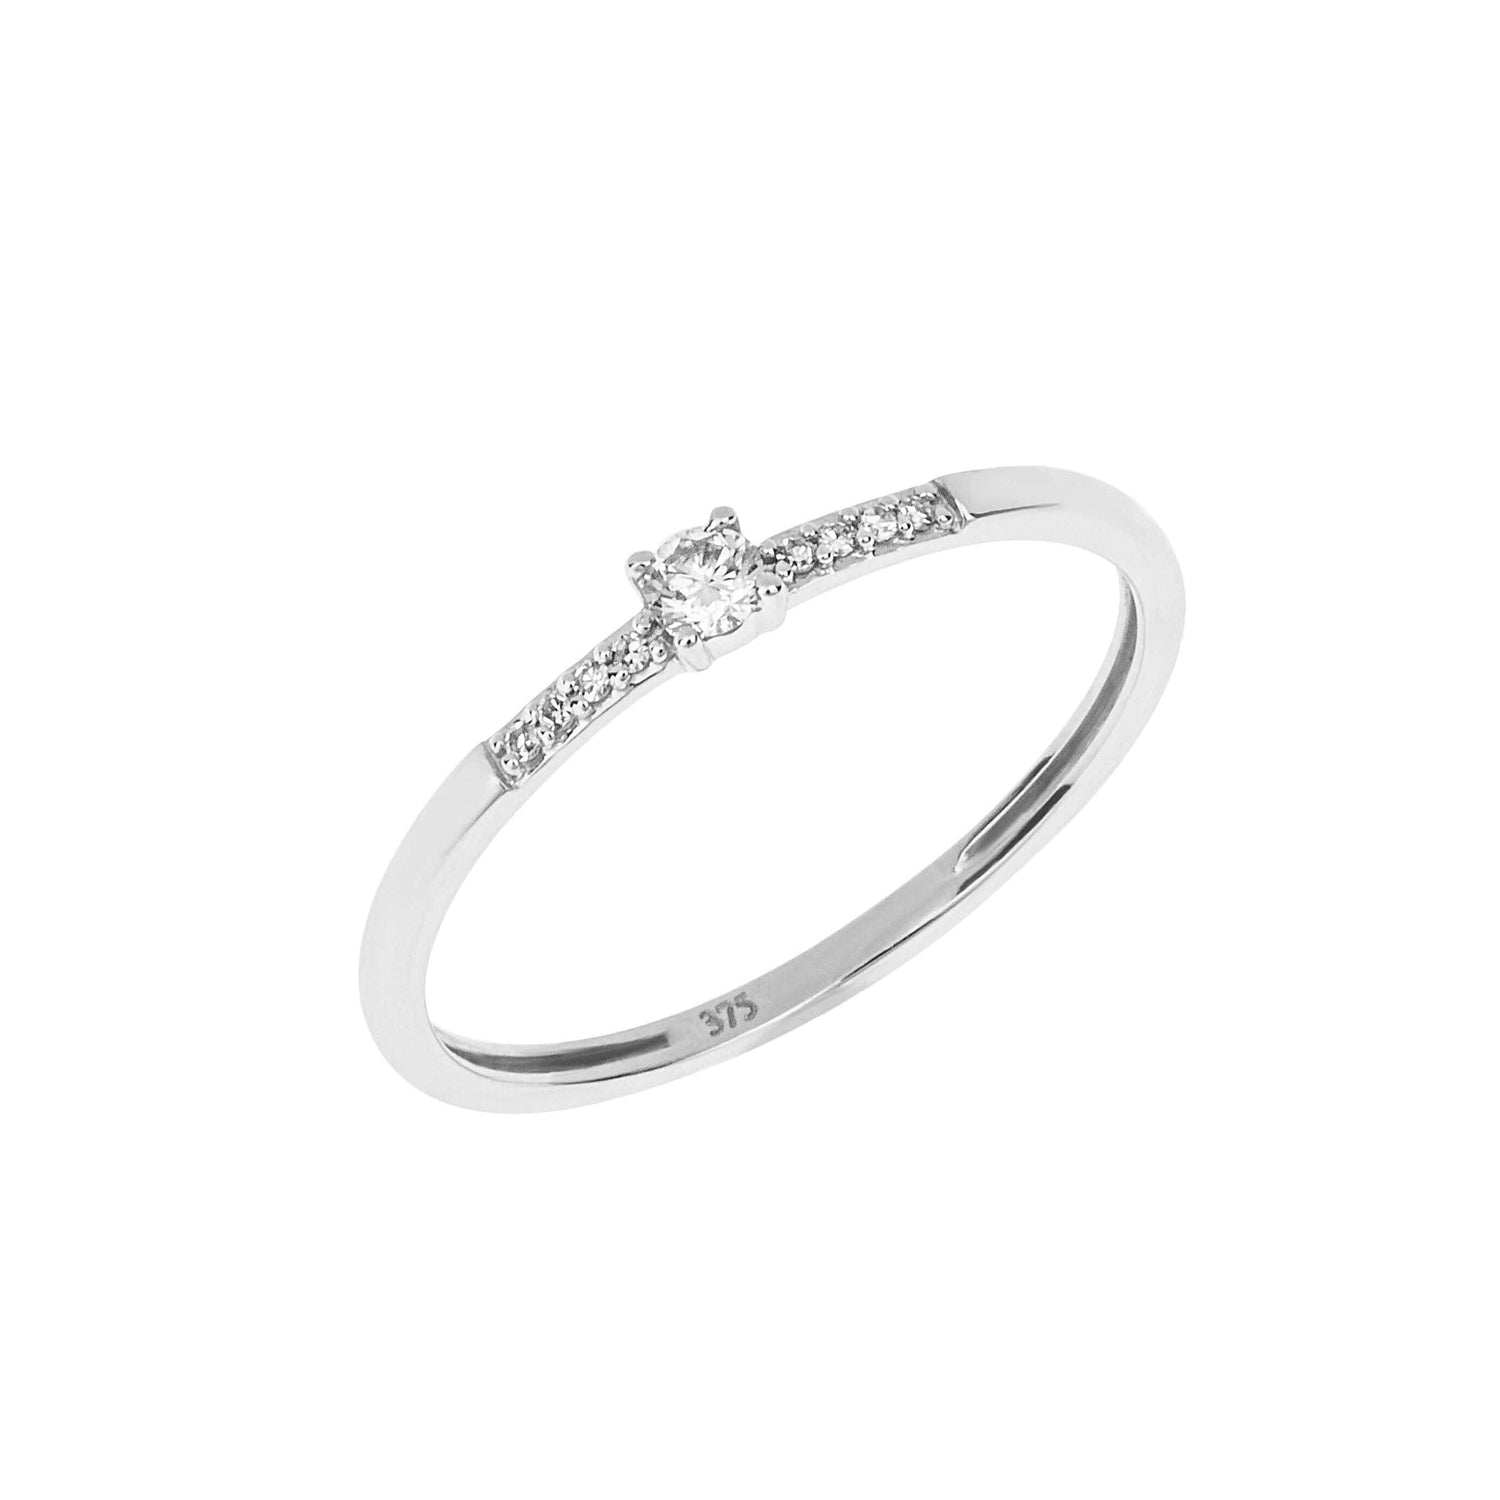 Solitaire Diamond Ring with Pave Shoulders in 9ct White Gold - Robert Anthony Jewellers, Edinburgh